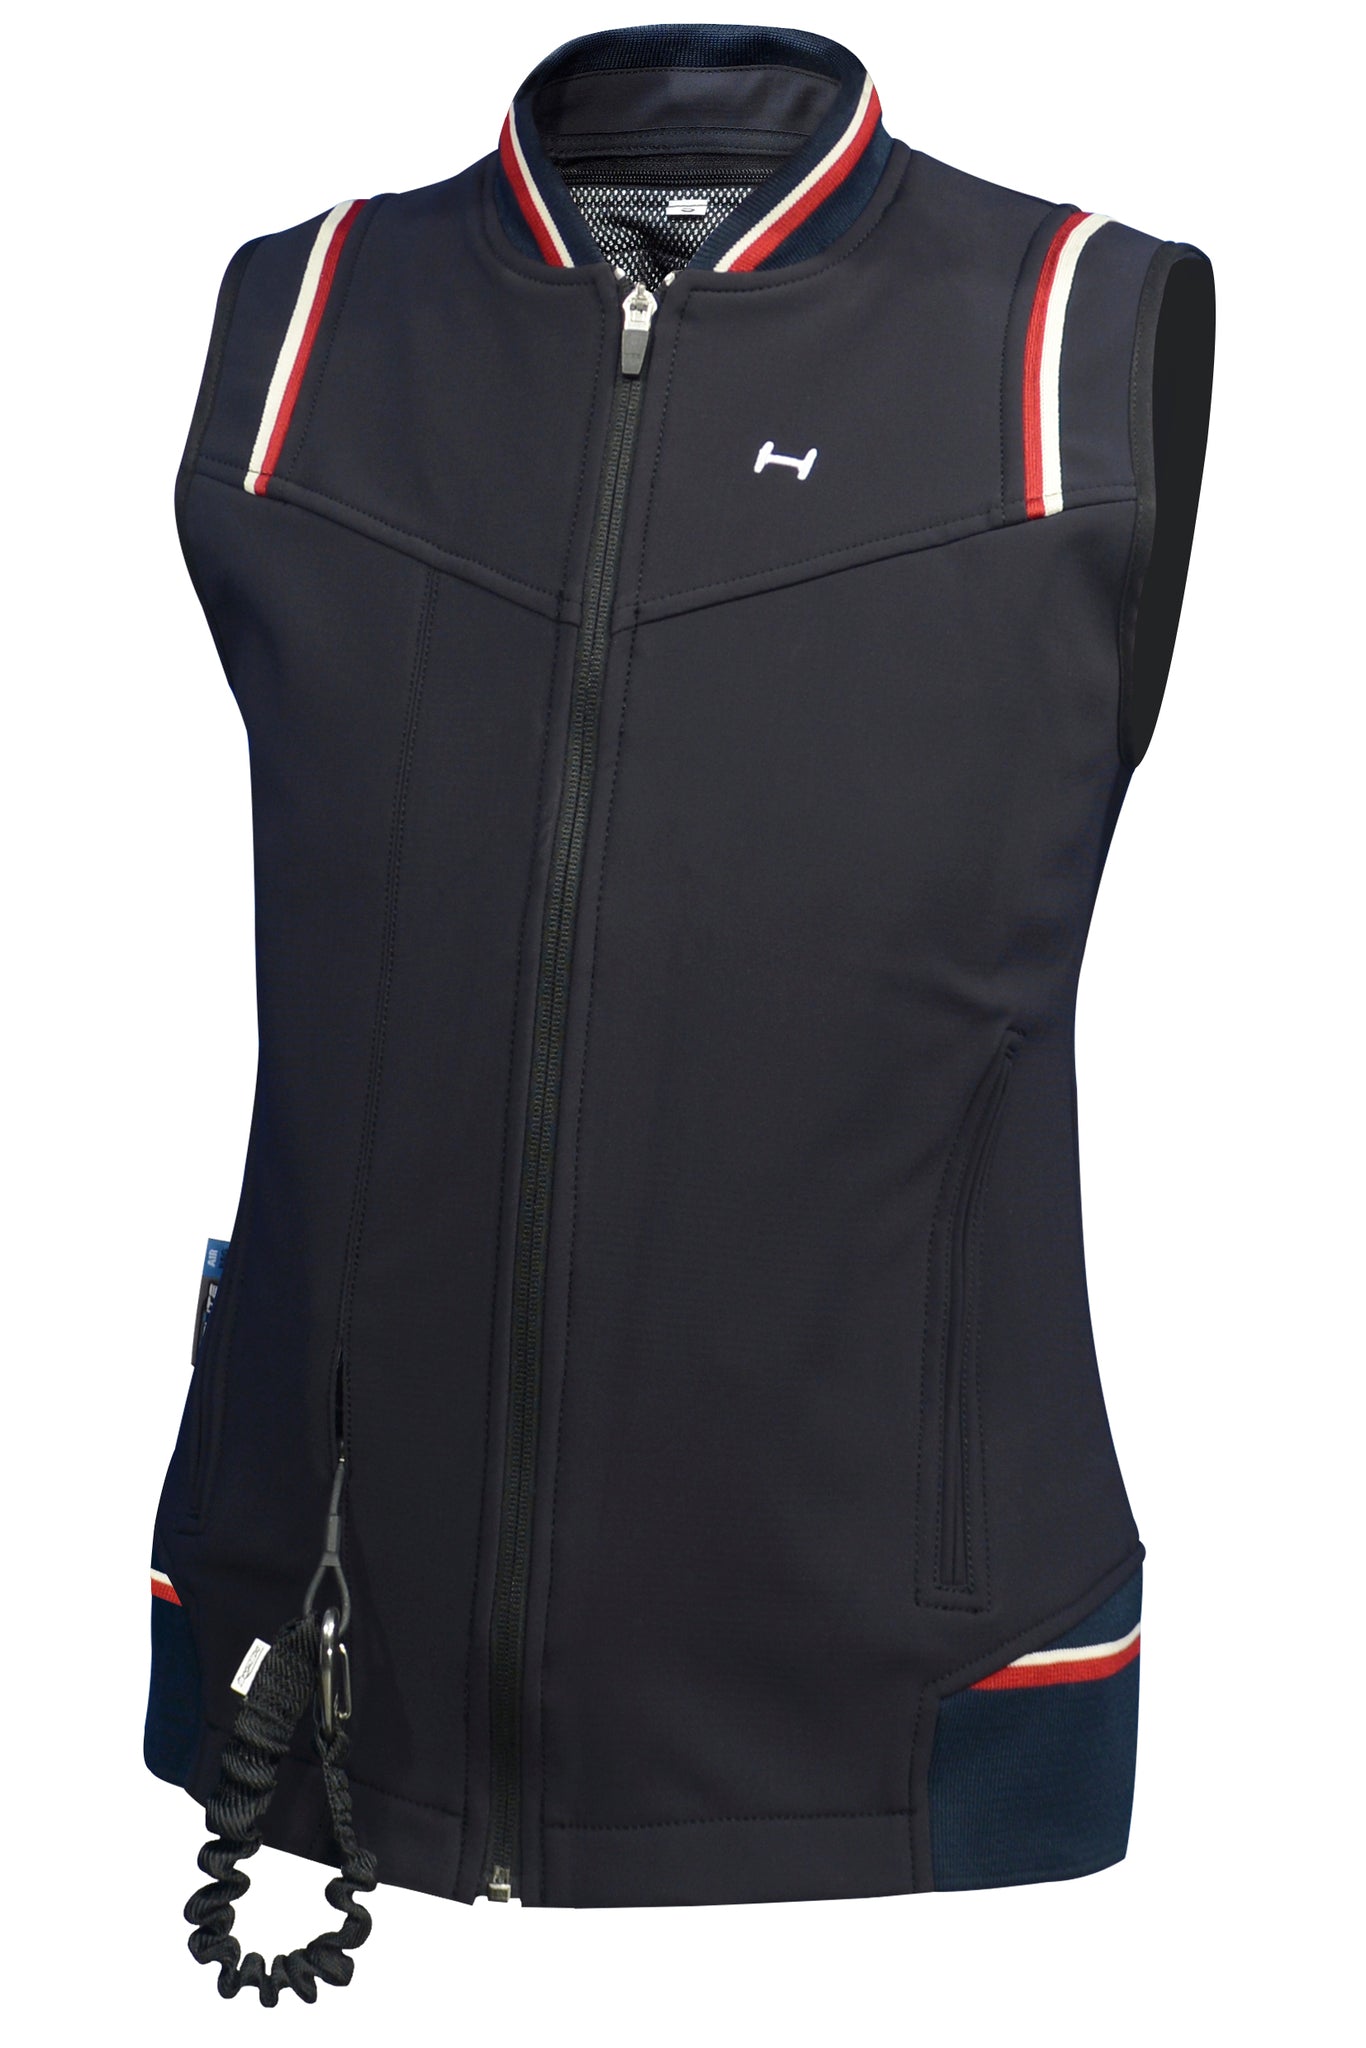 Helite Airshell Prestige - Child - Dark Blue/Red This is clothing for an air vest